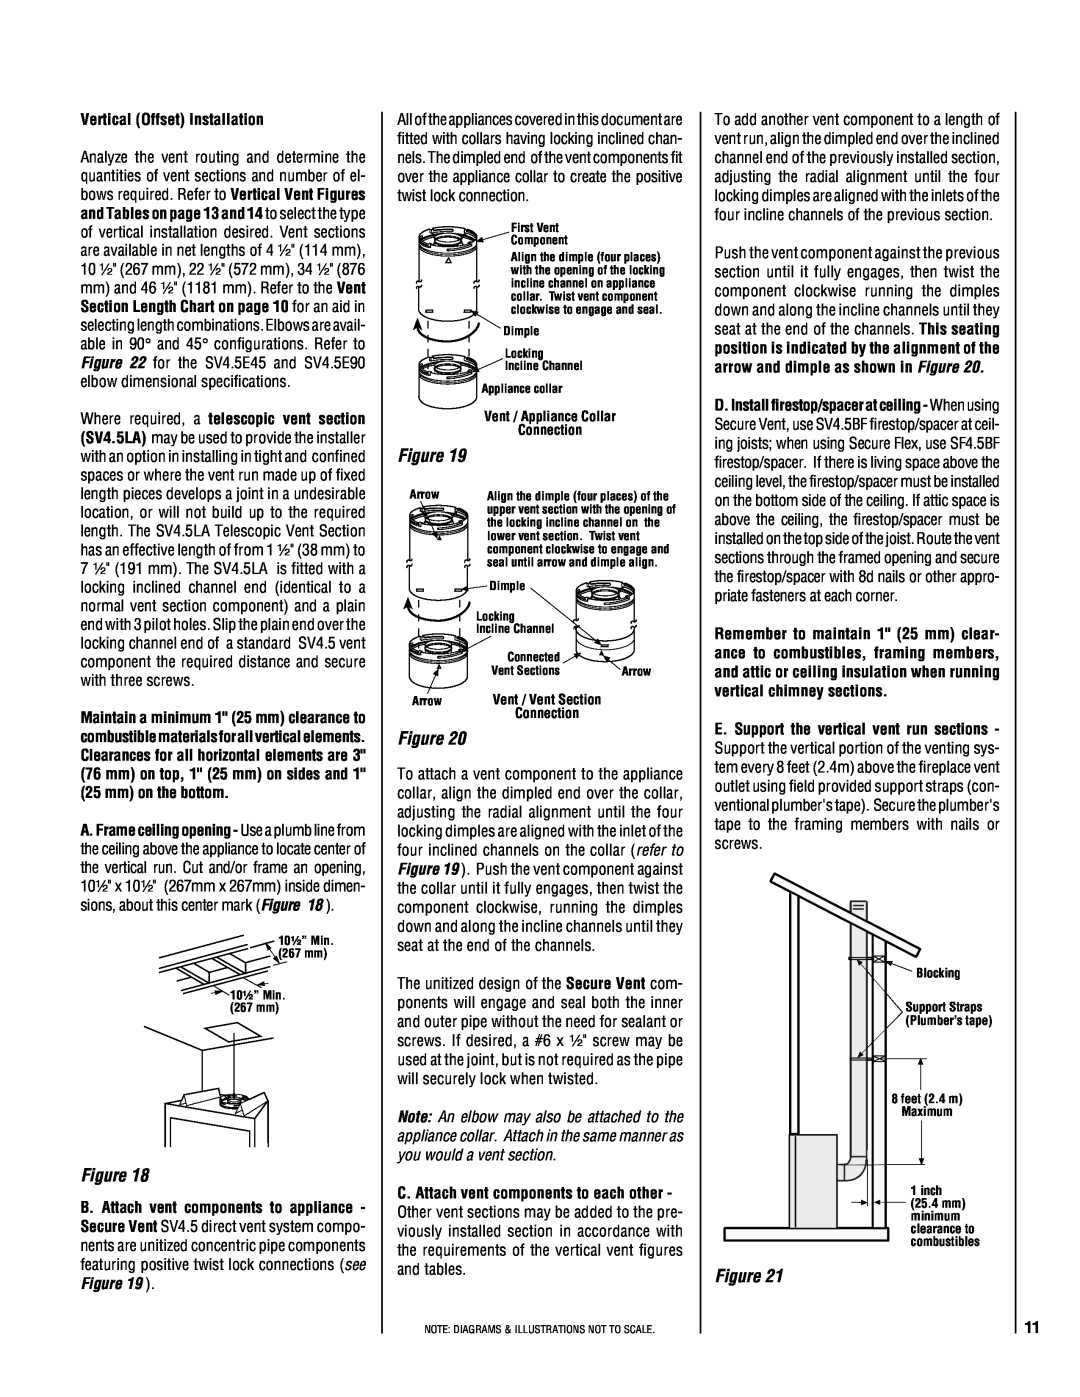 TOA Electronics 600 installation instructions Vertical Offset Installation, Vent / Appliance Collar Connection 